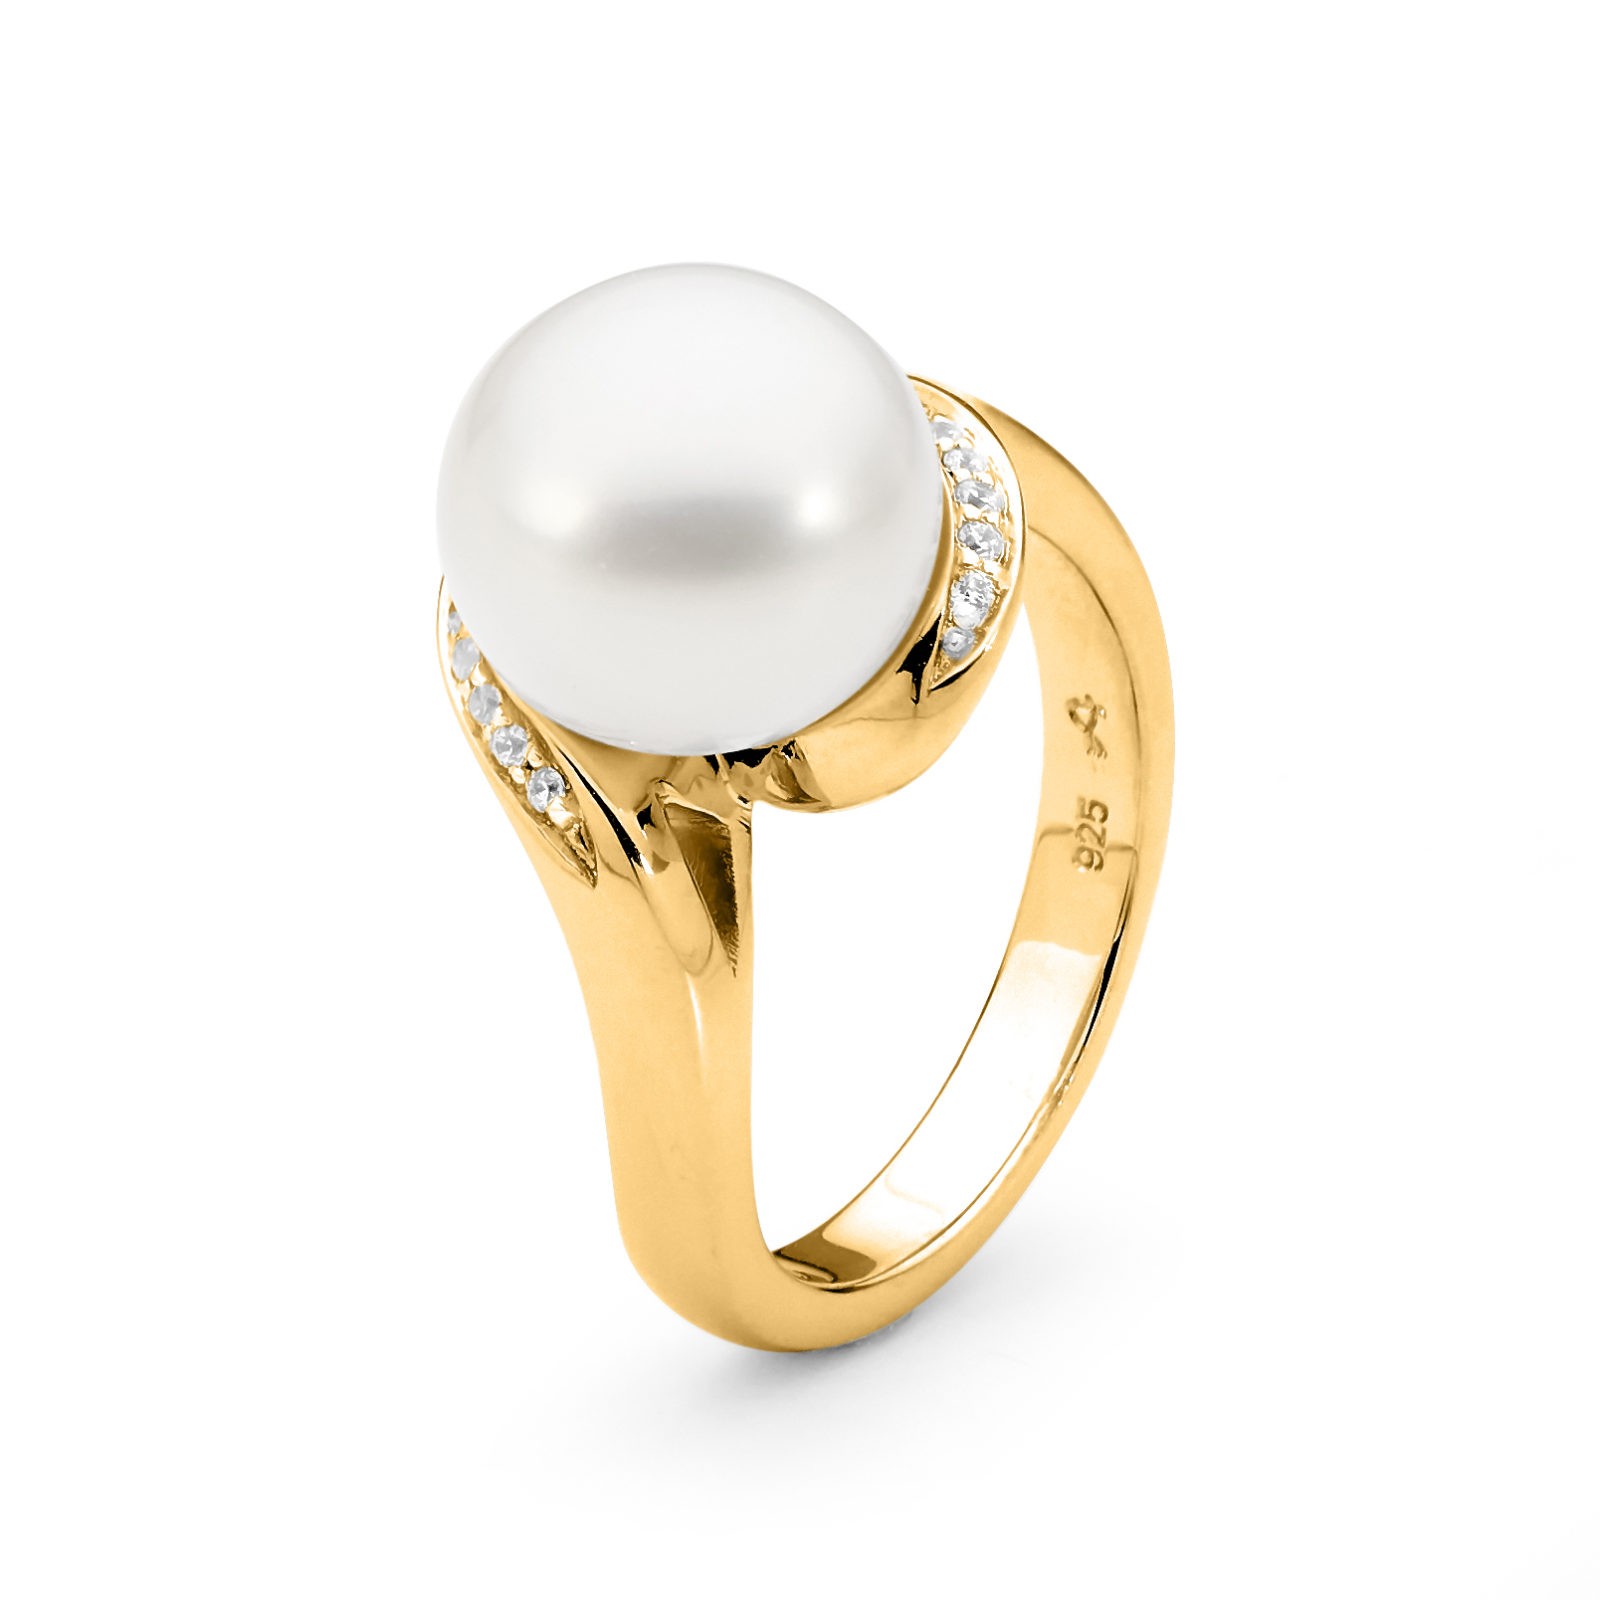 Halo Wrap Around Pearl Ring - Allure South Sea Pearls